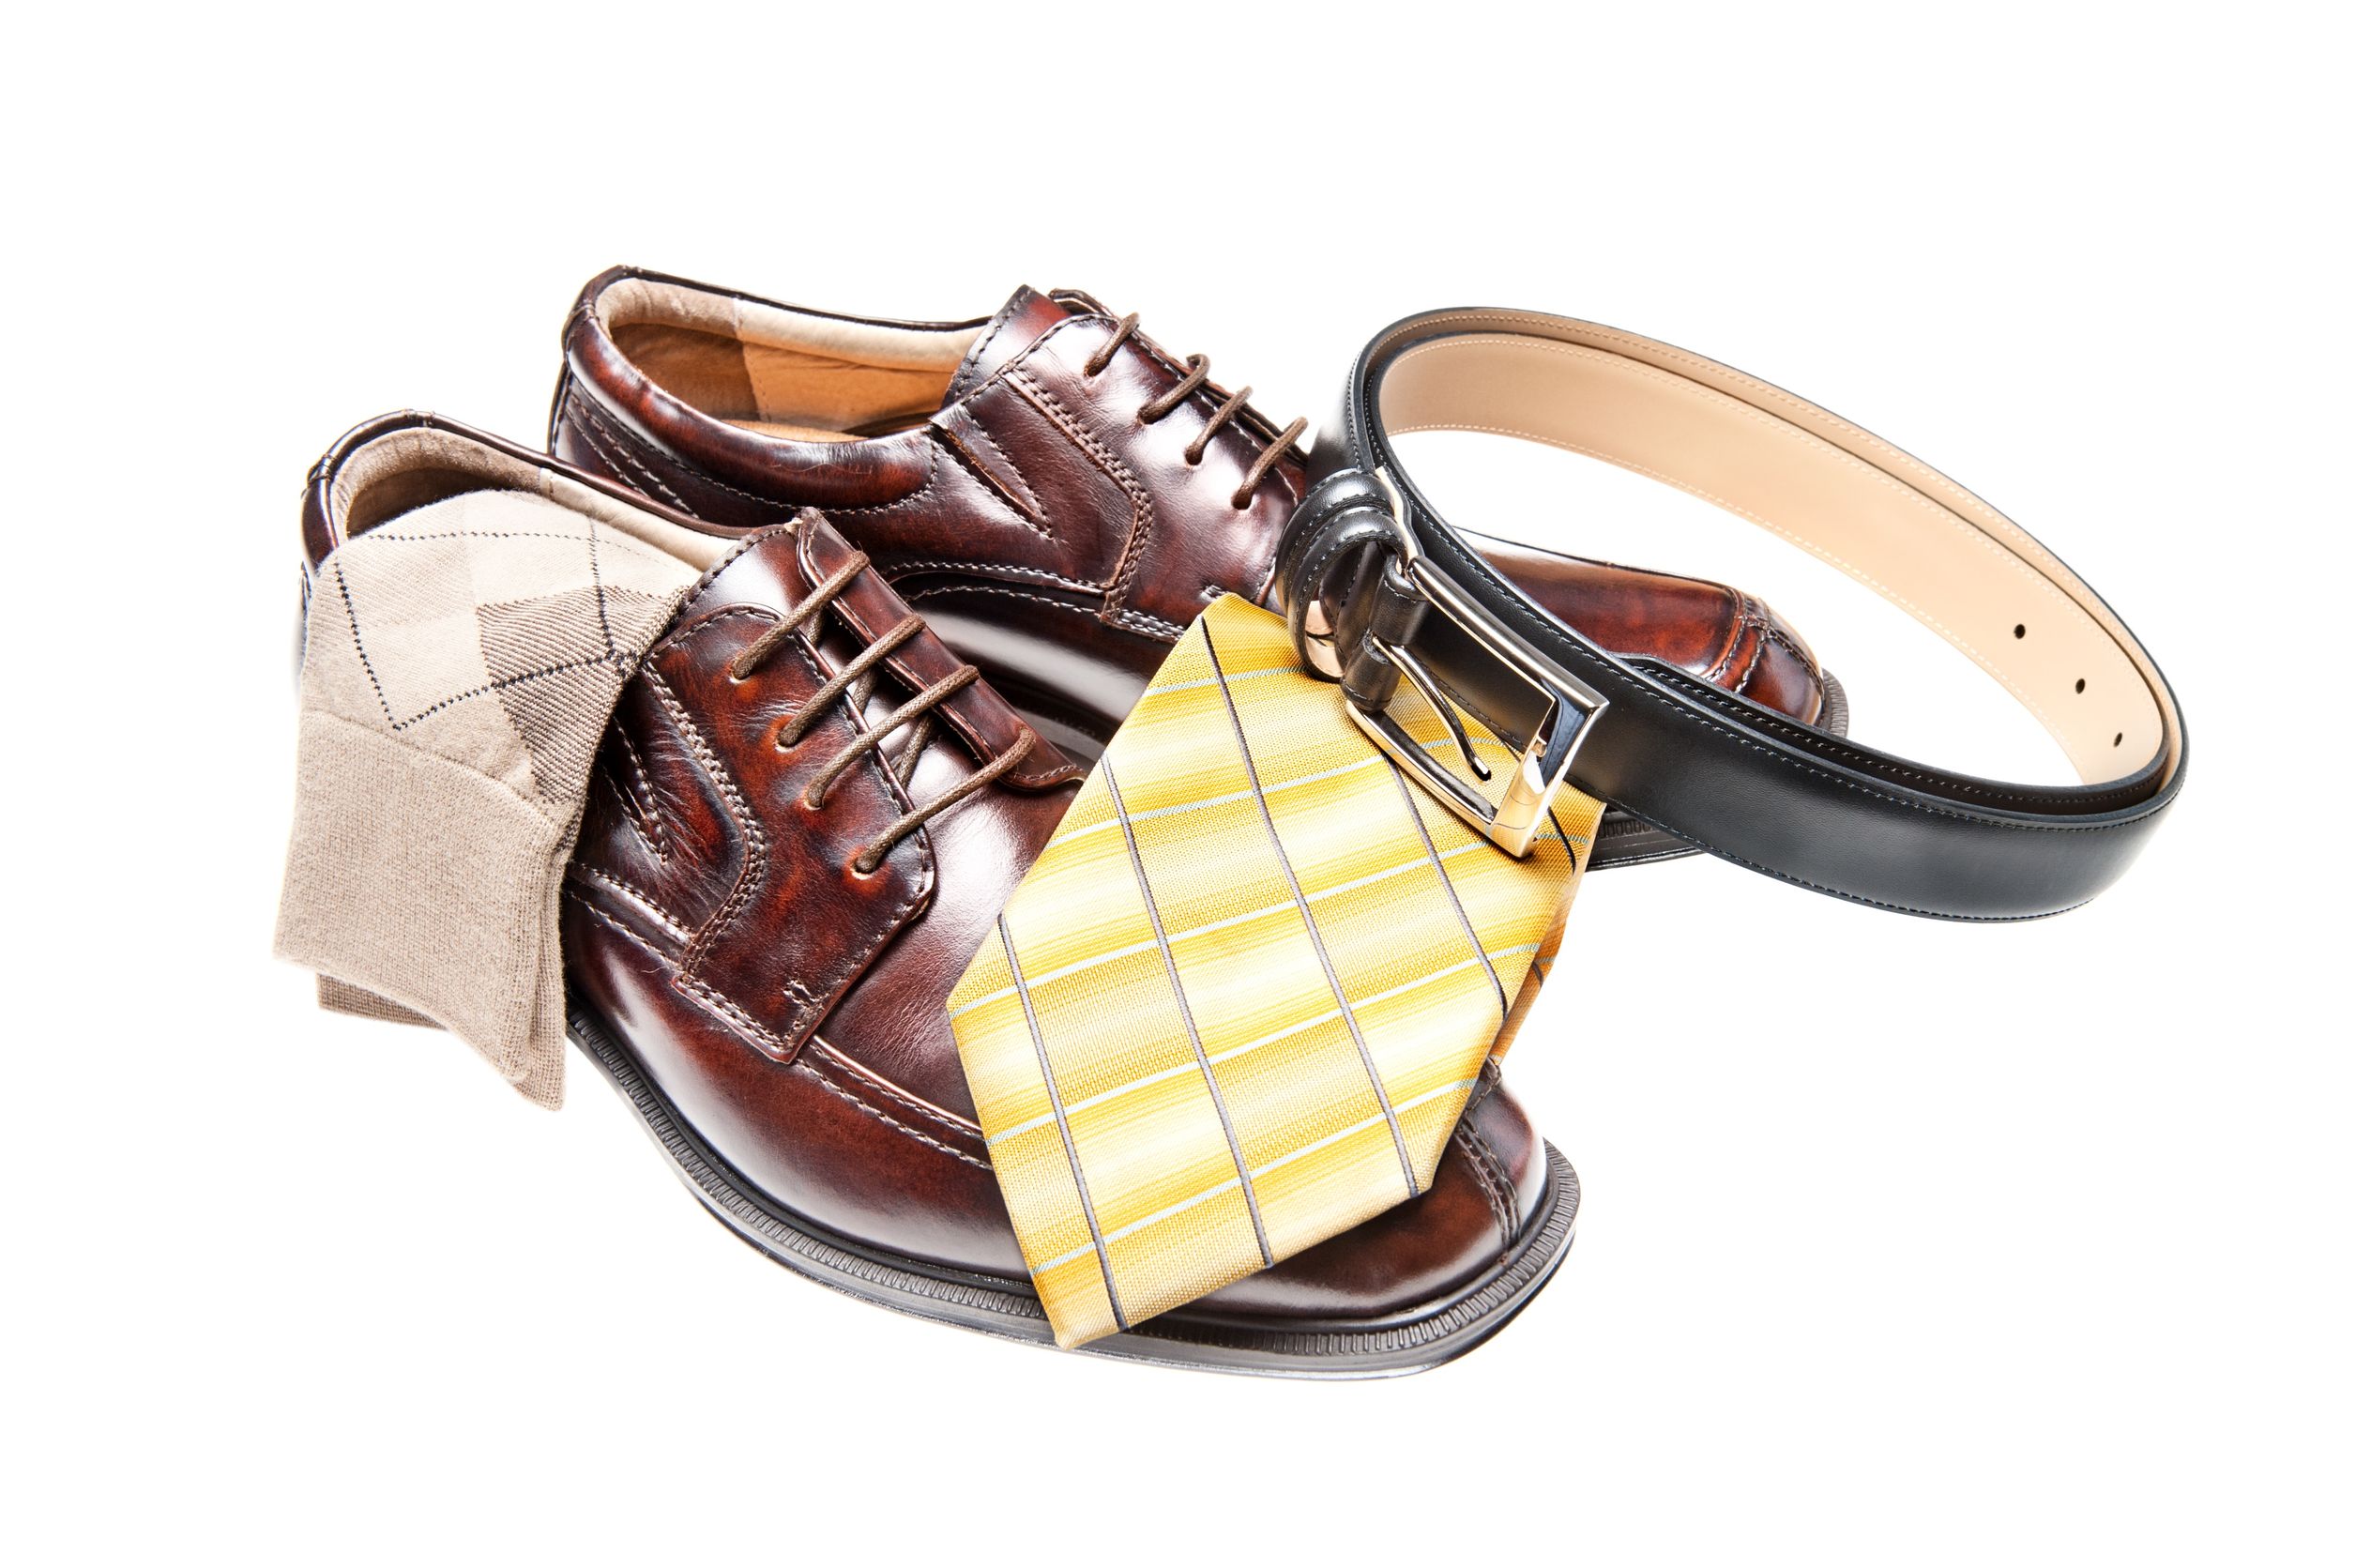 12460999 - brown leather dress shoes with argyle socks and a black belt